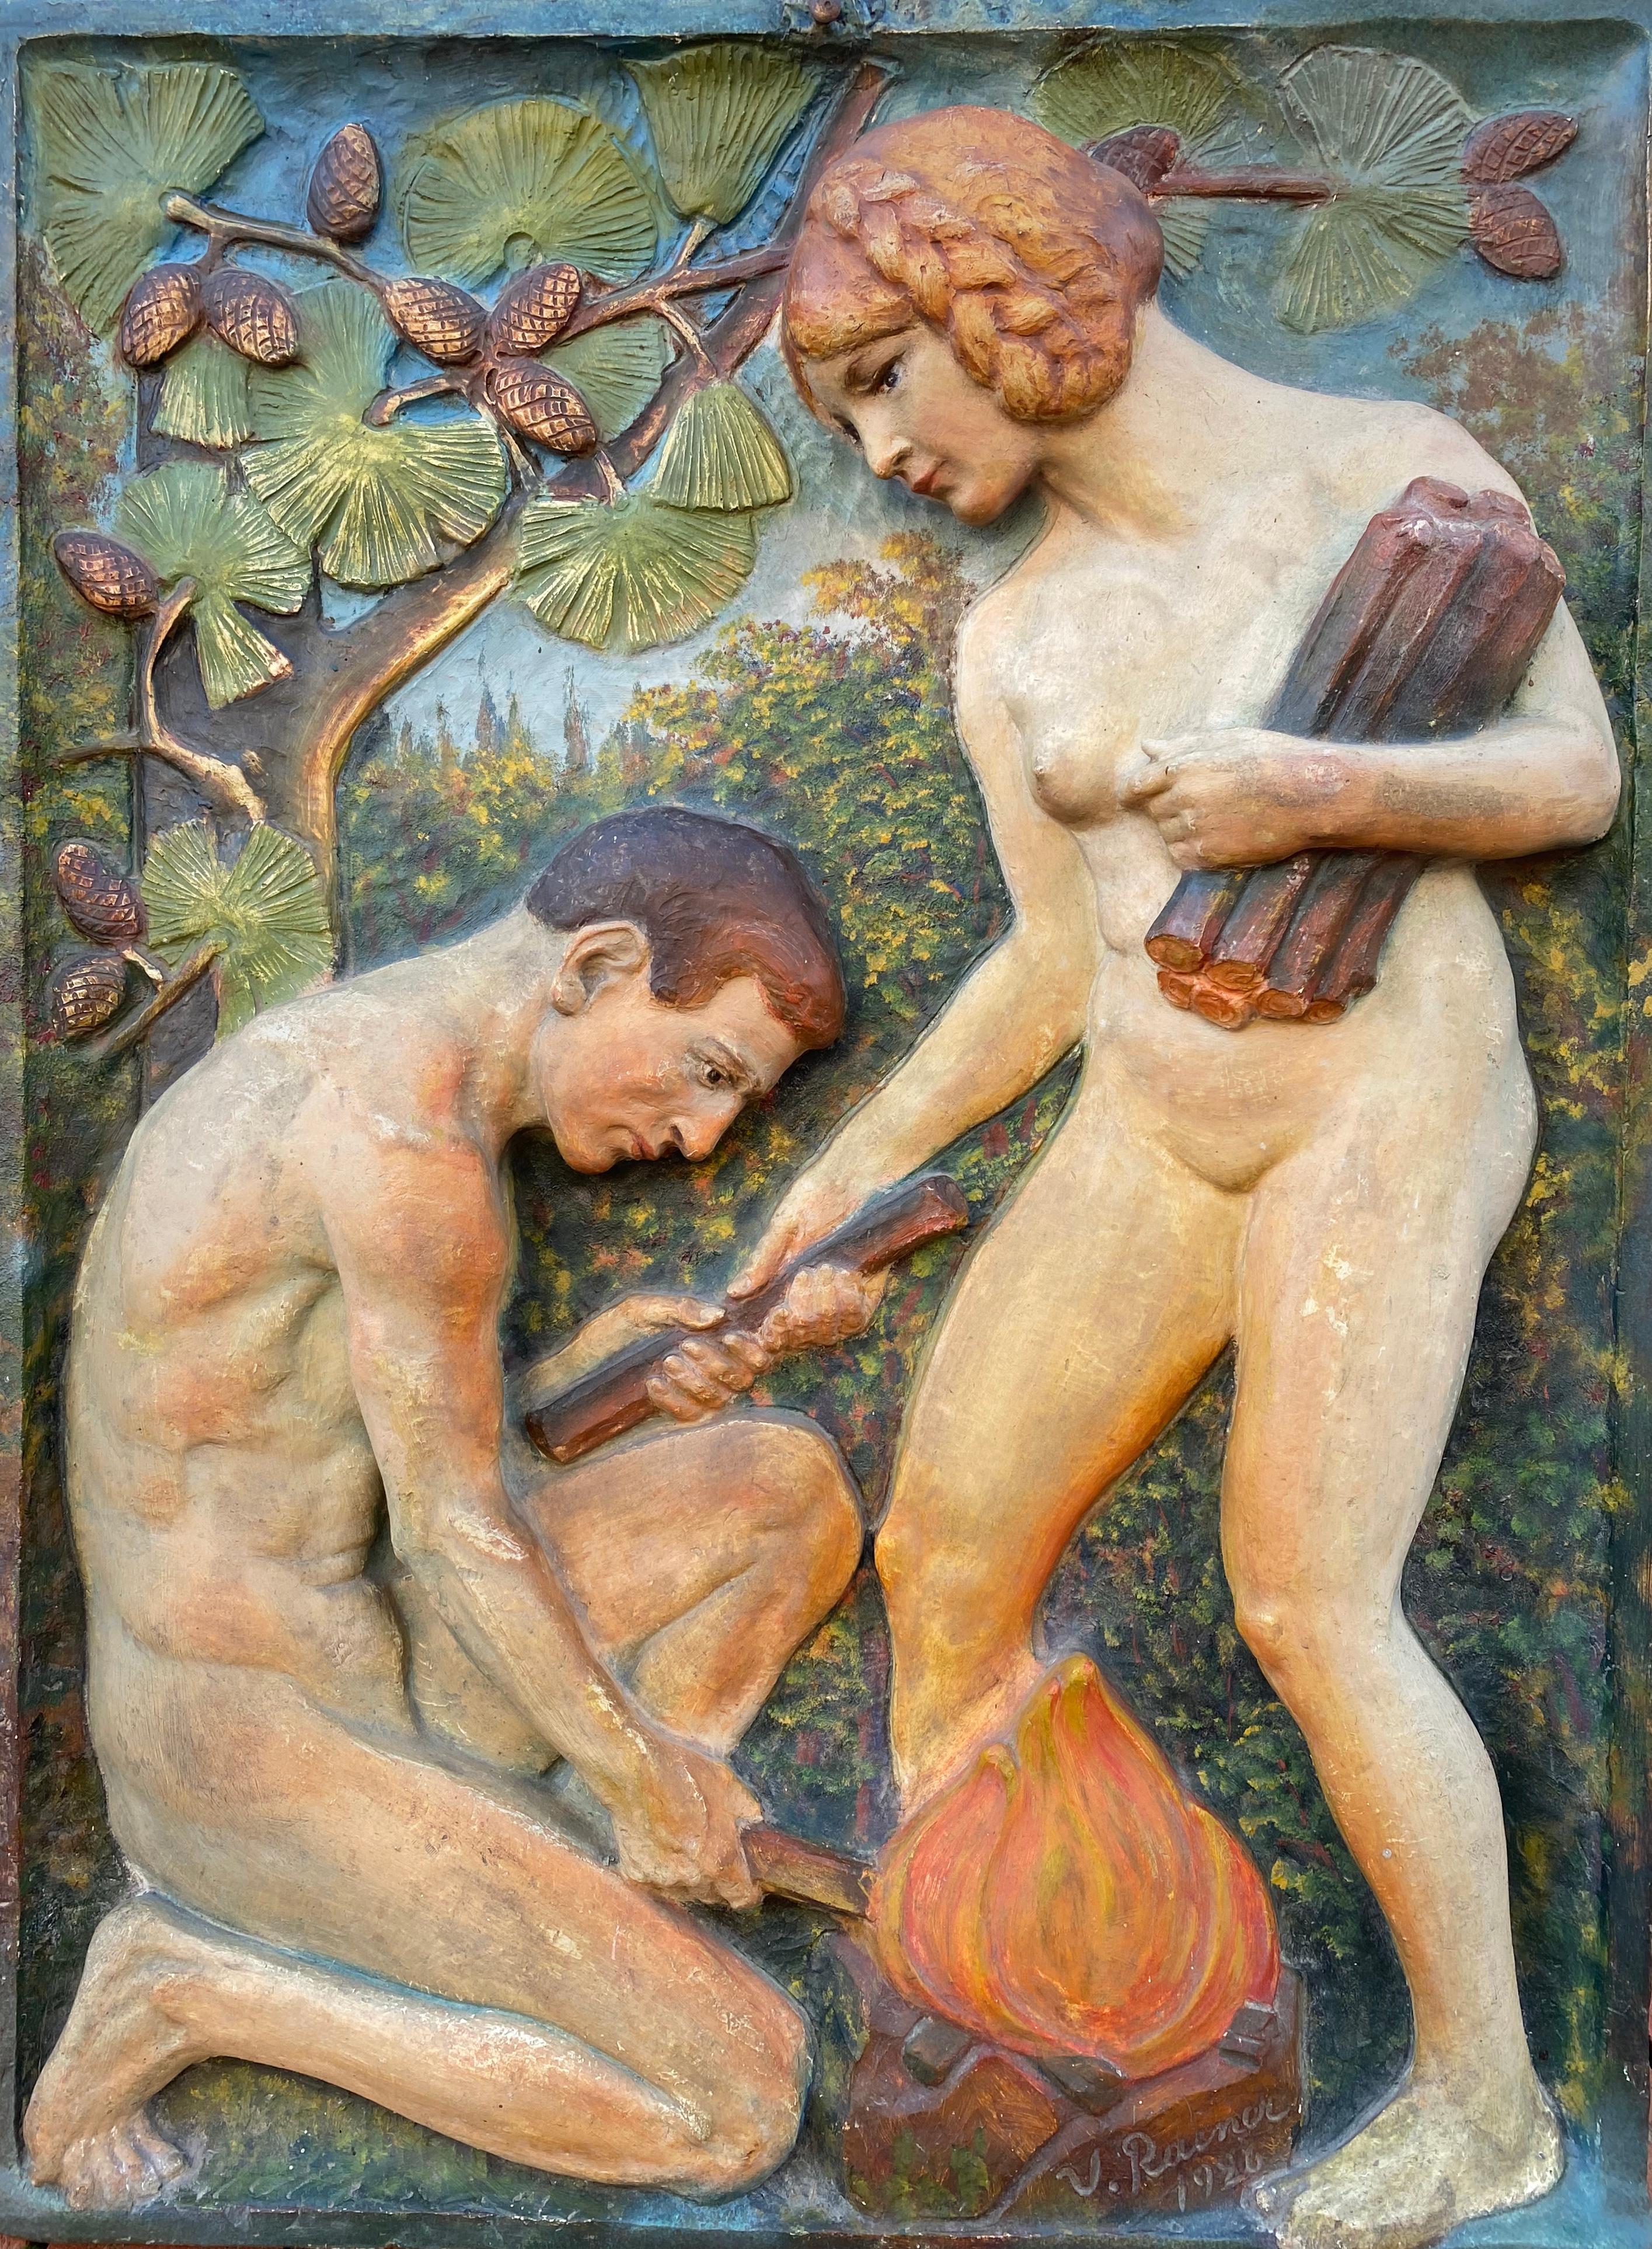 “Adam and Eve” - Sculpture by Virgil Rainer